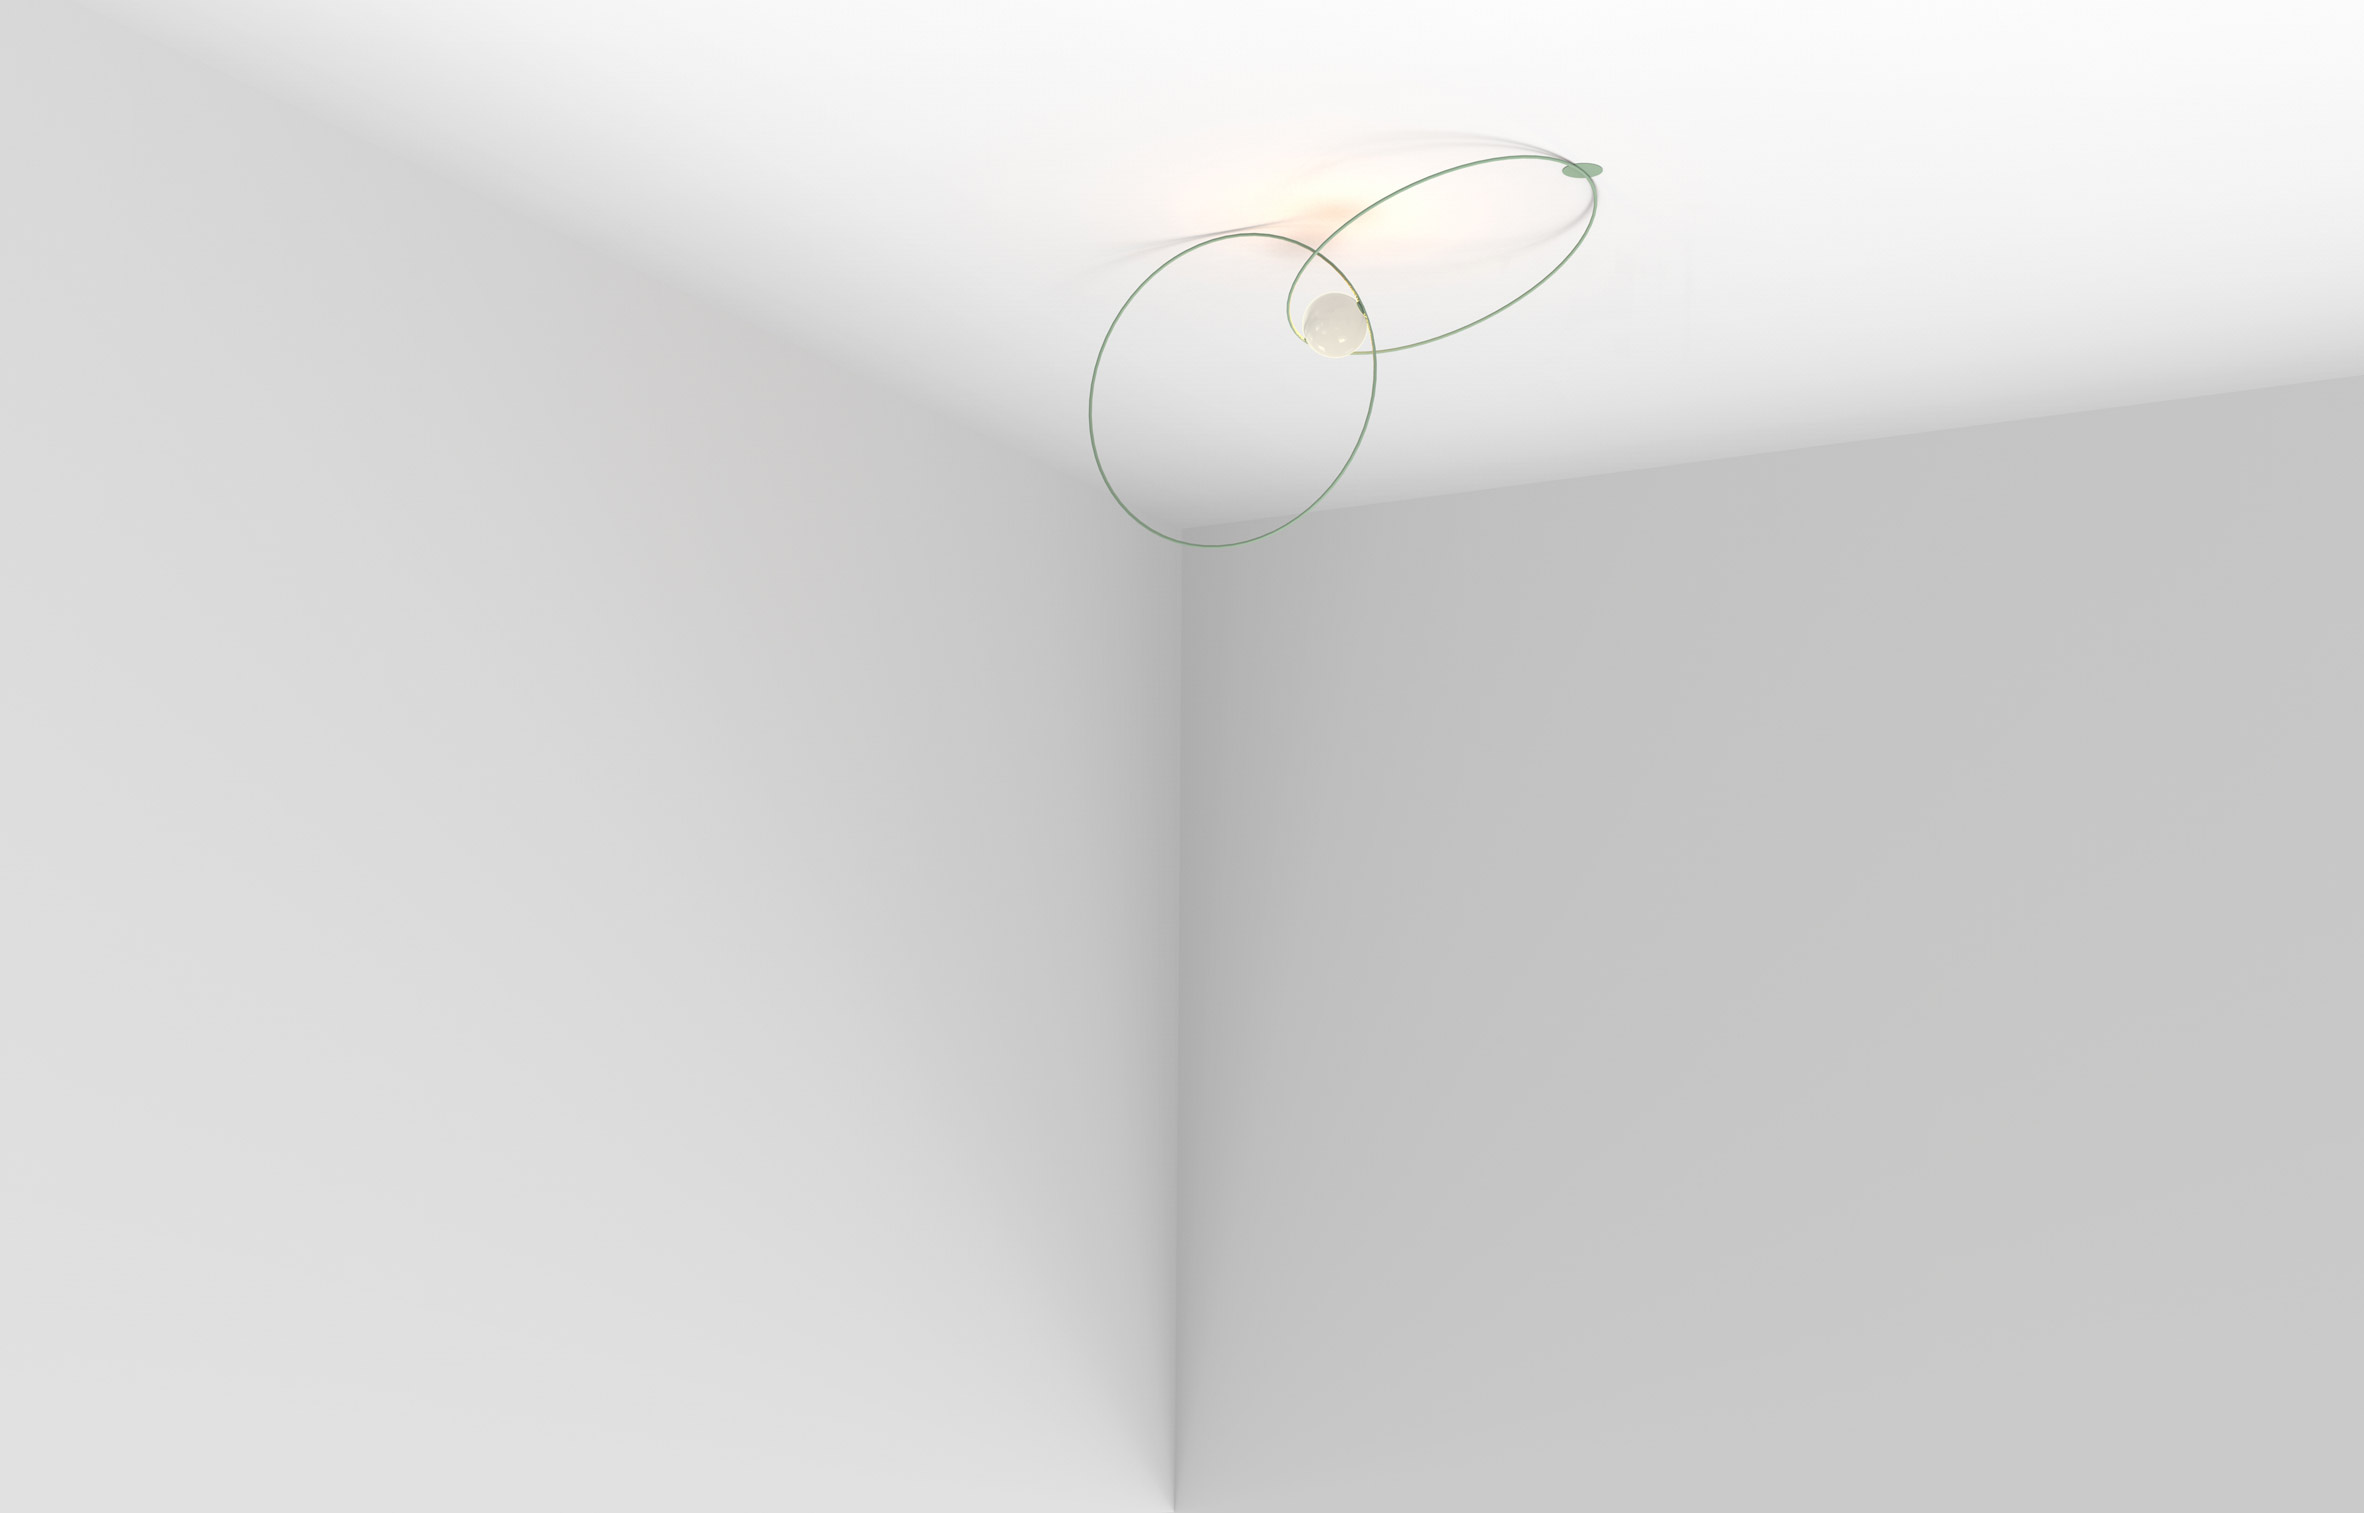 bespoke-loop-collection-by-michael-anastassiades-at-future-perfect-miami-design-lighting-_dezeen_2364_col_7